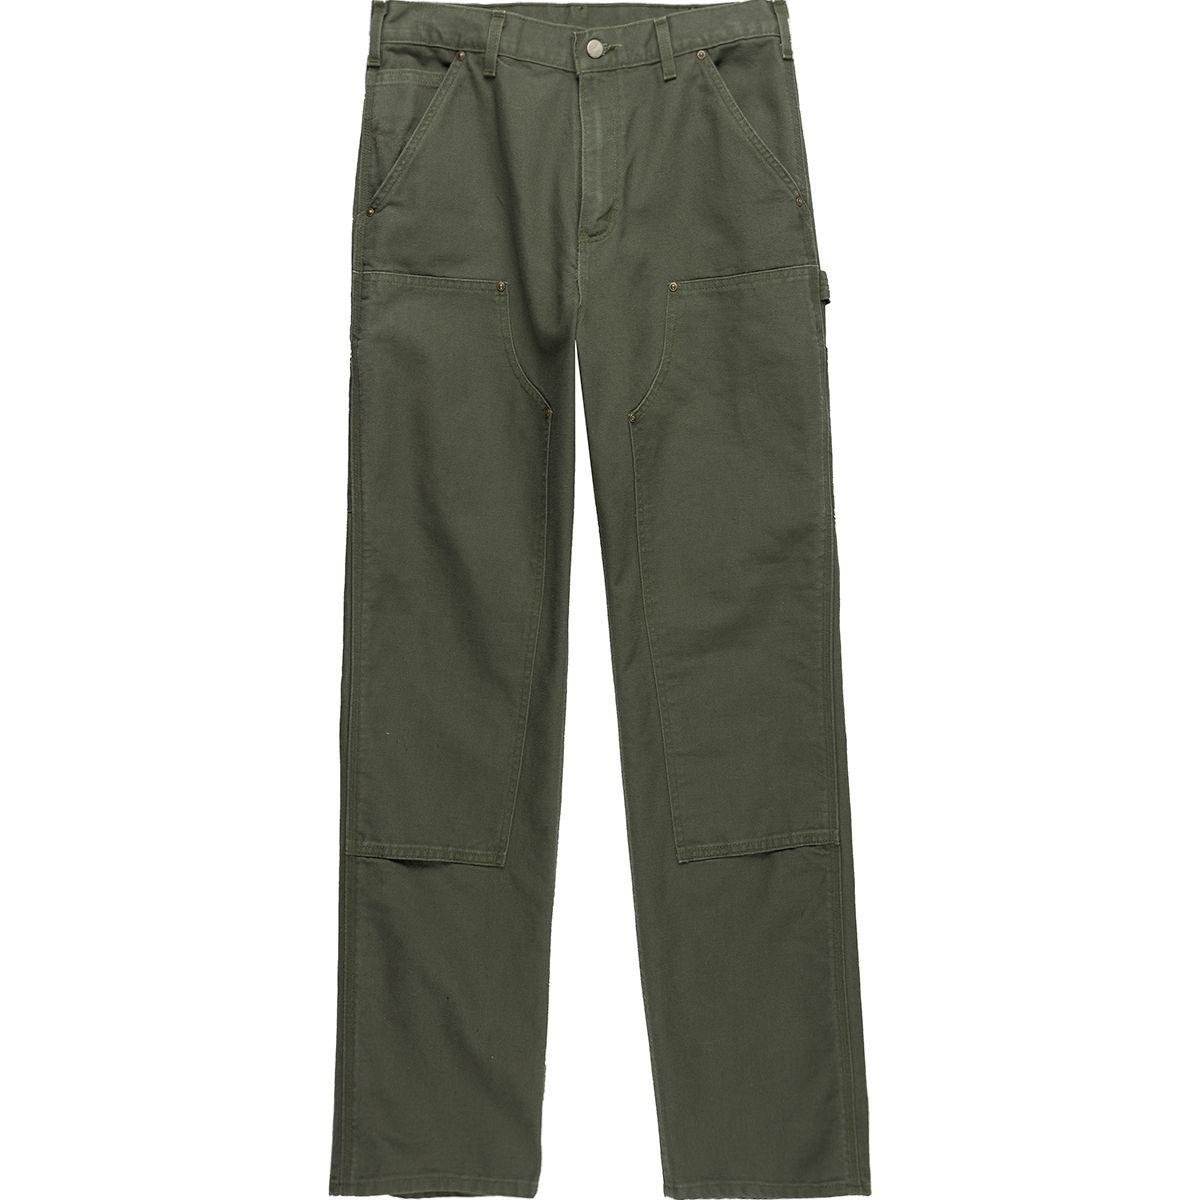 Carhartt Cotton Washed-duck Double-front Work Dungaree Pant in Moss ...